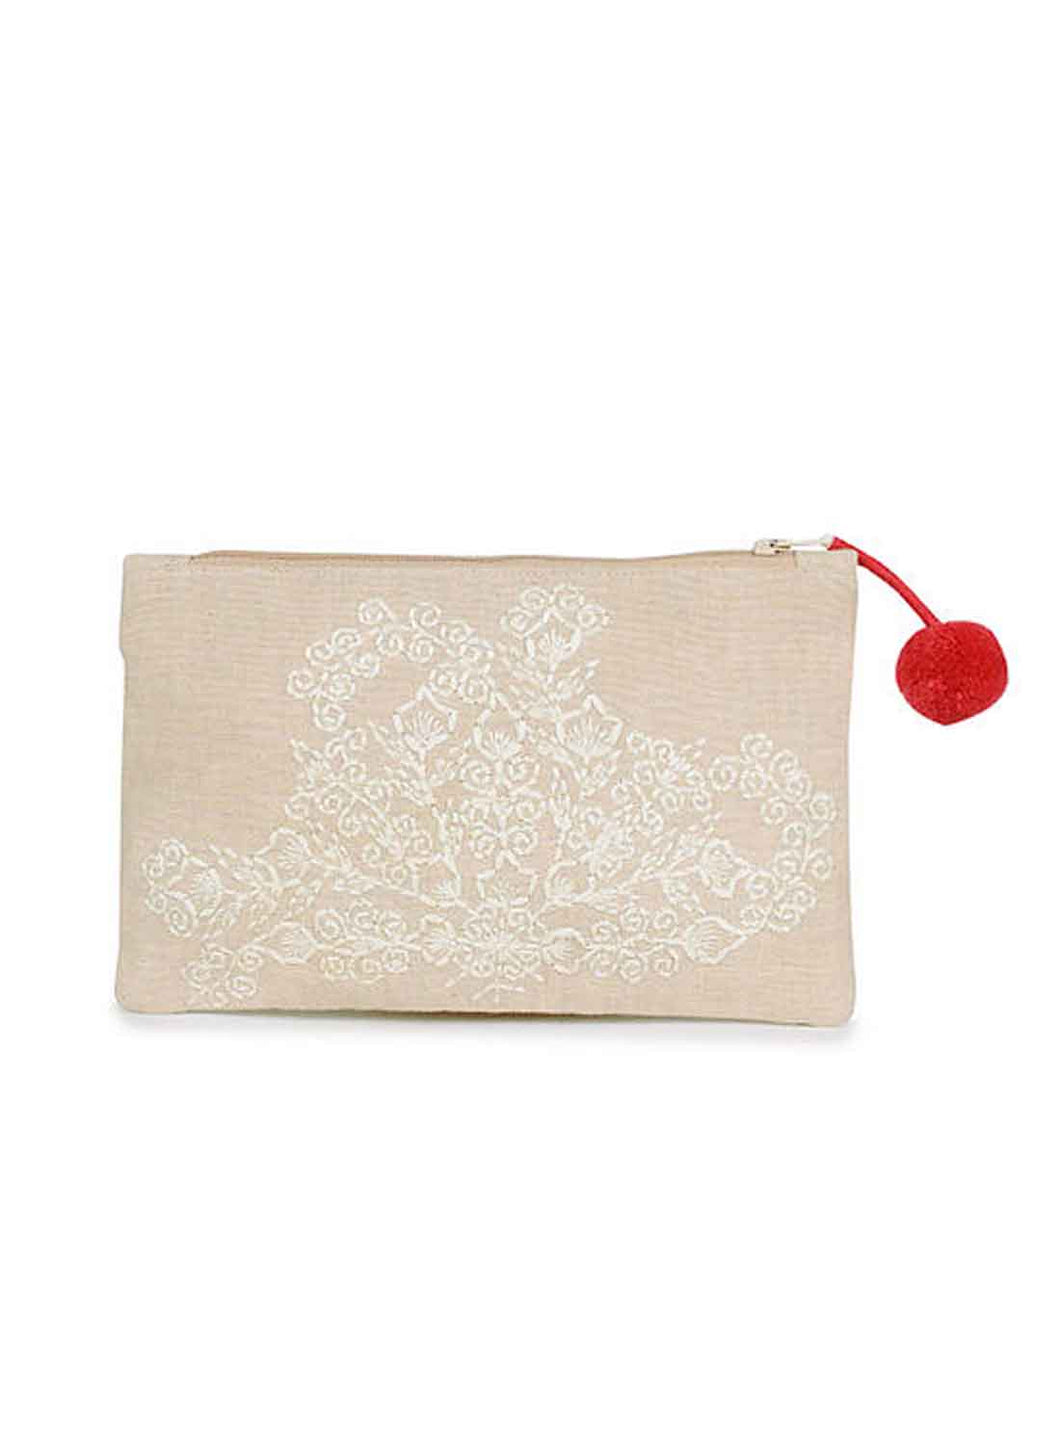 Kanyoga Embroidered Cotton Pouch With Pom Pom Attached For Women